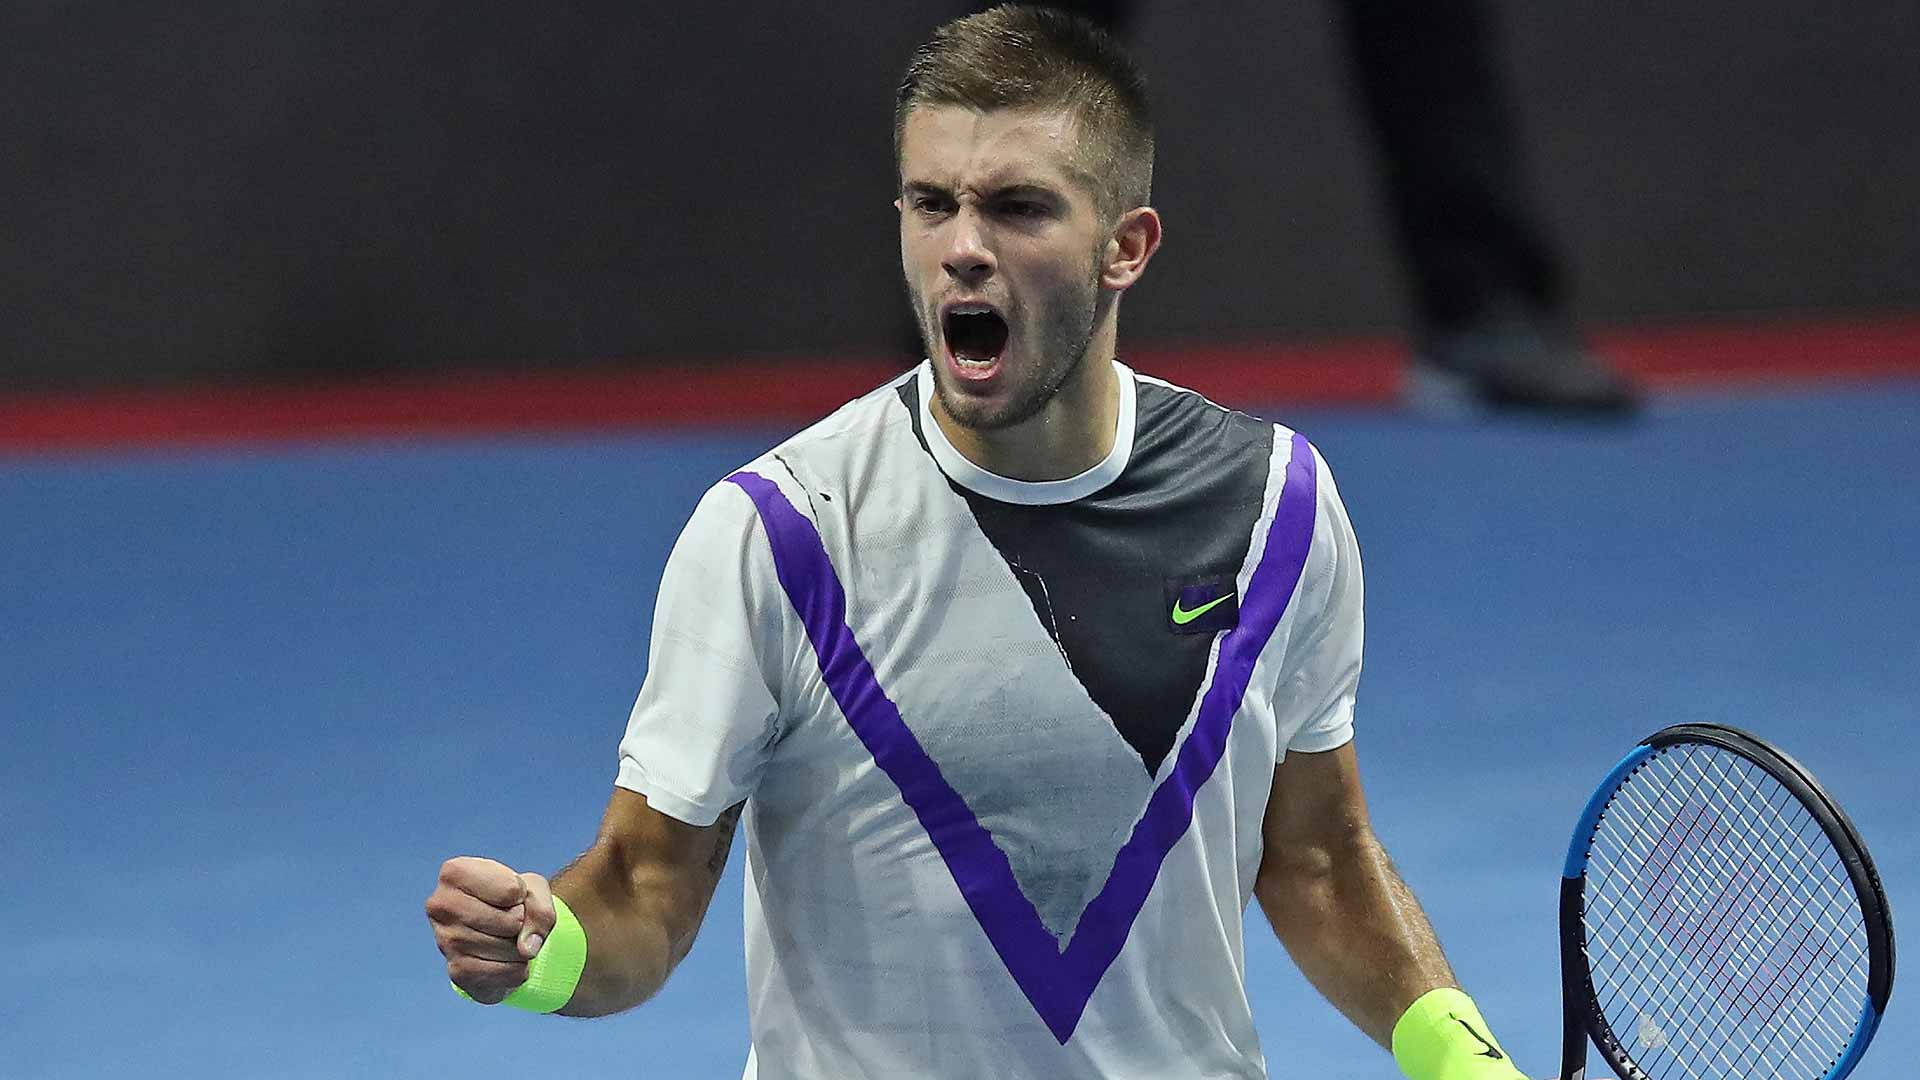 Borna Coric has jumpstarted his season this week at the St. Petersburg Open.